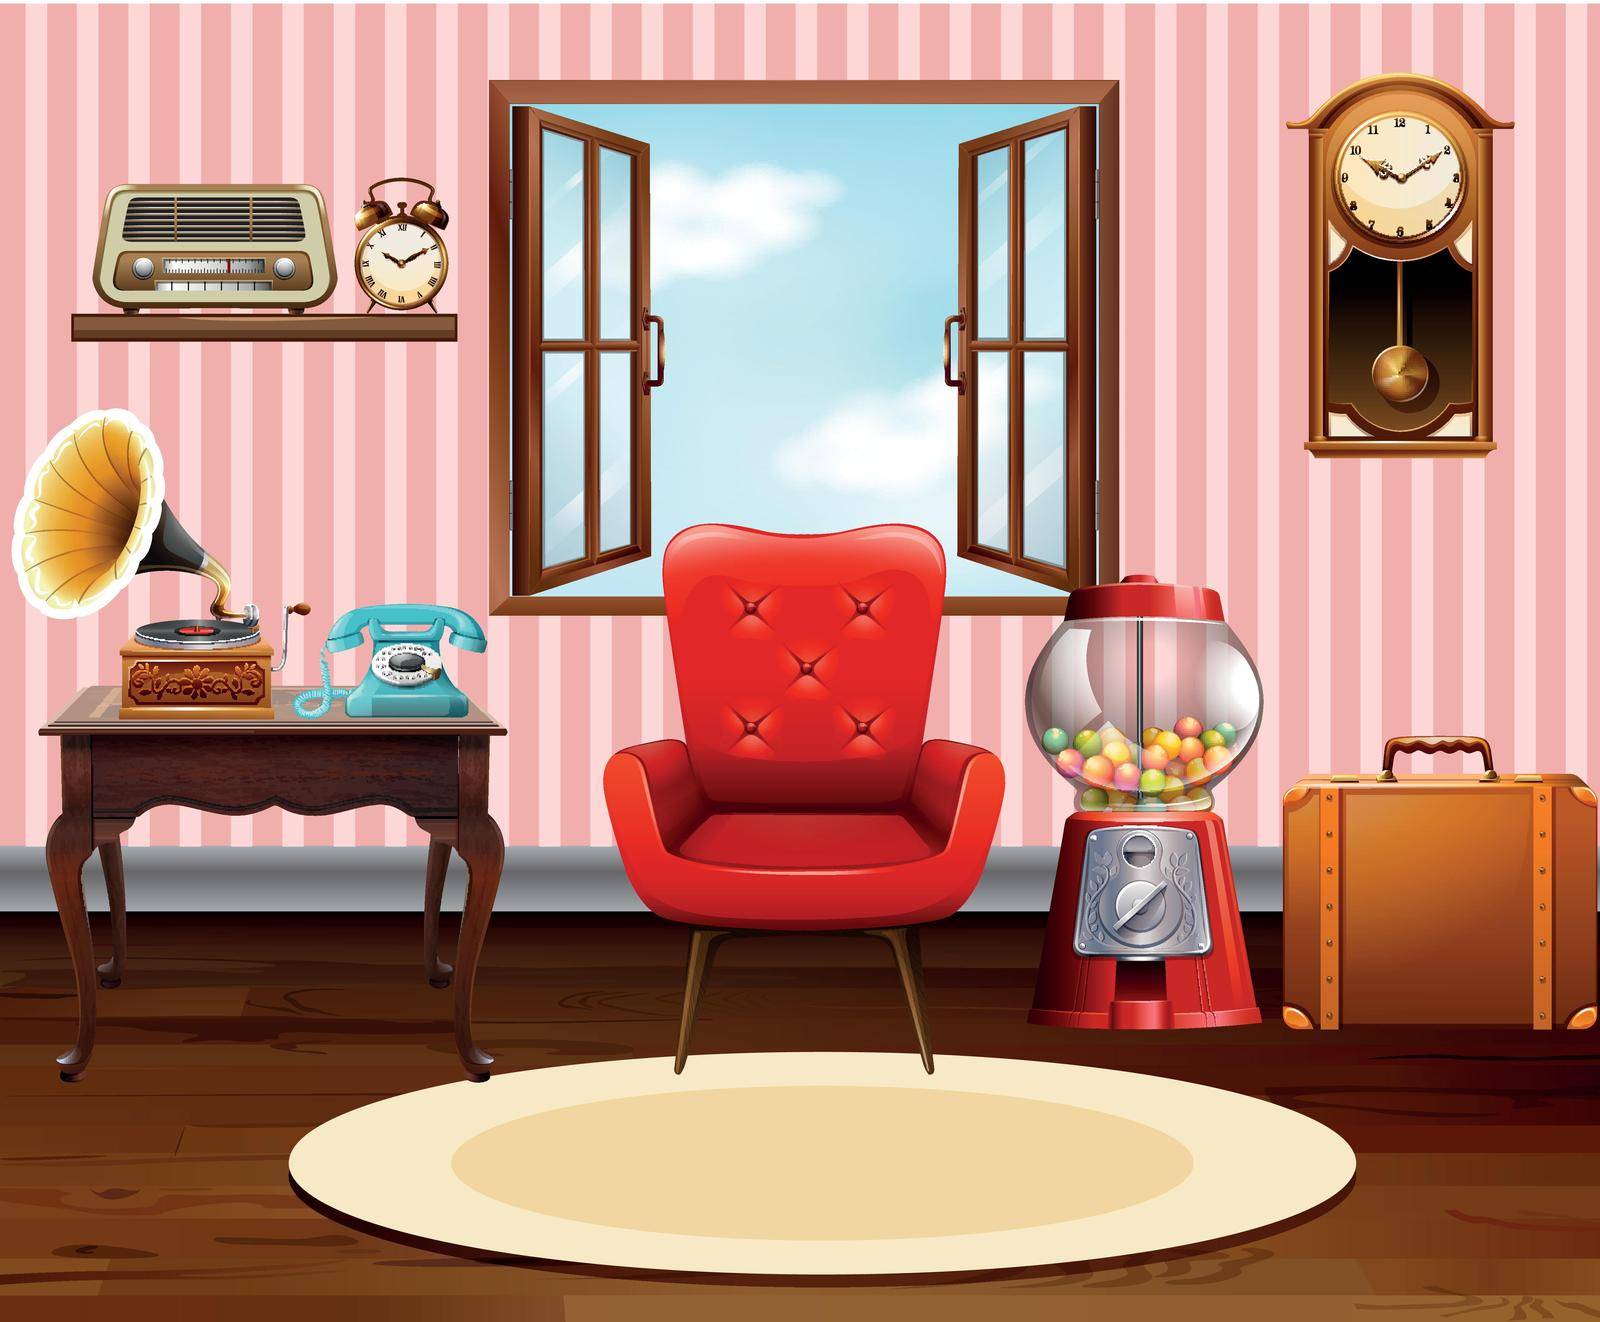 Living room with vintage objects illustration